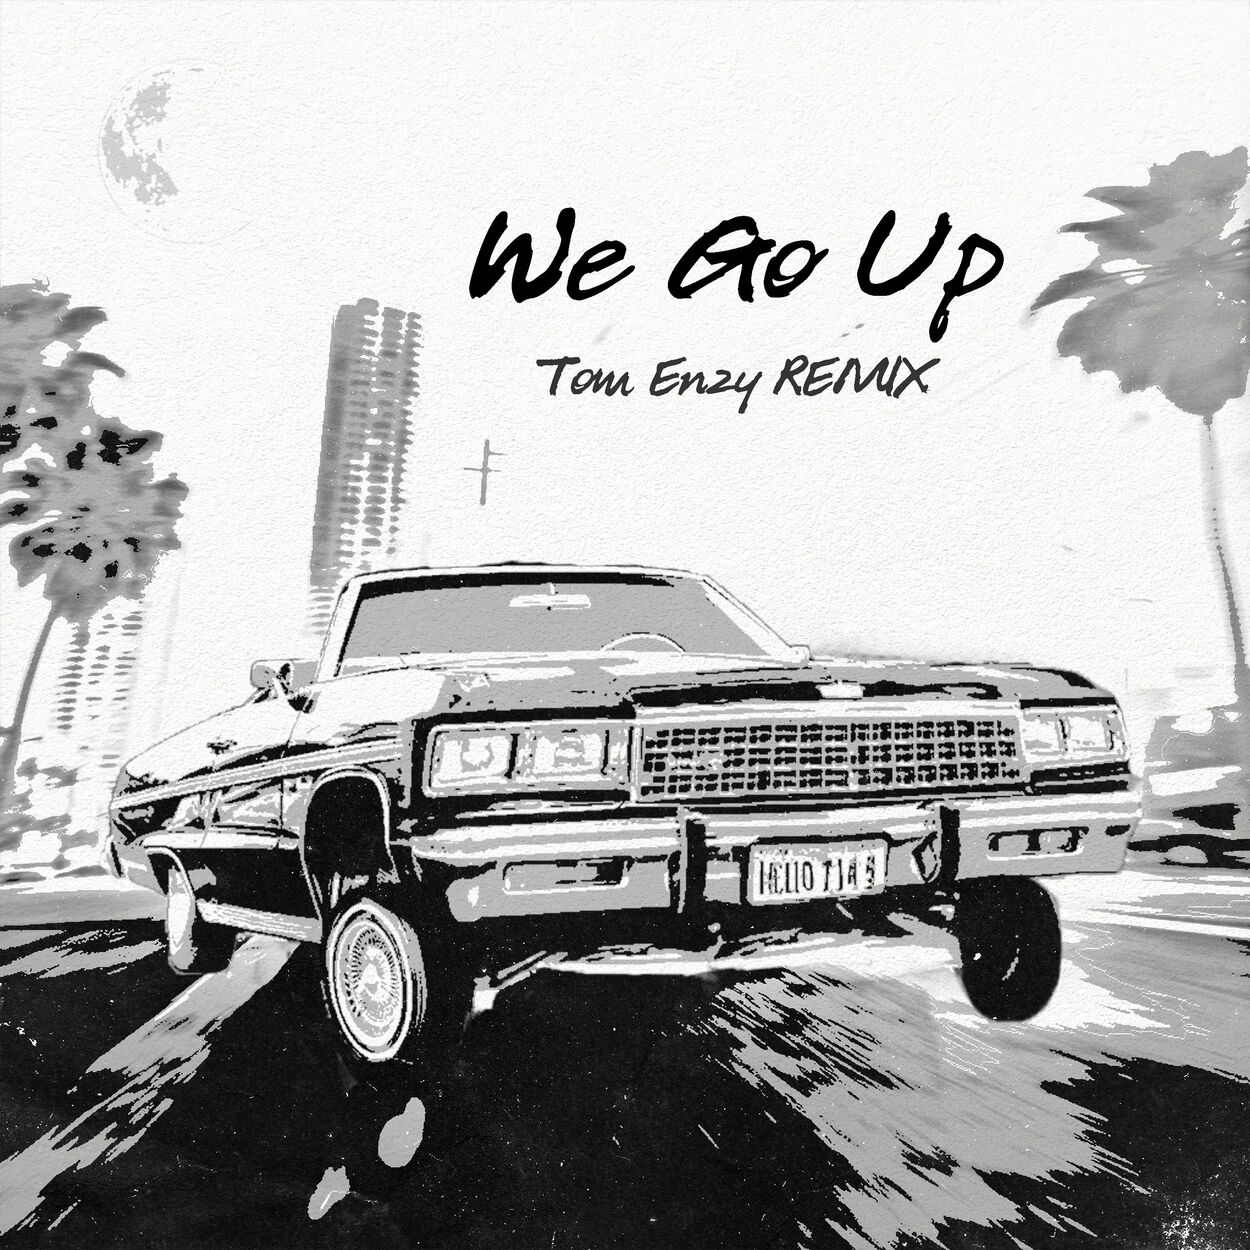 Taeo, Bababa & Young Code – We Go Up (Tom Enzy Remix) – Single